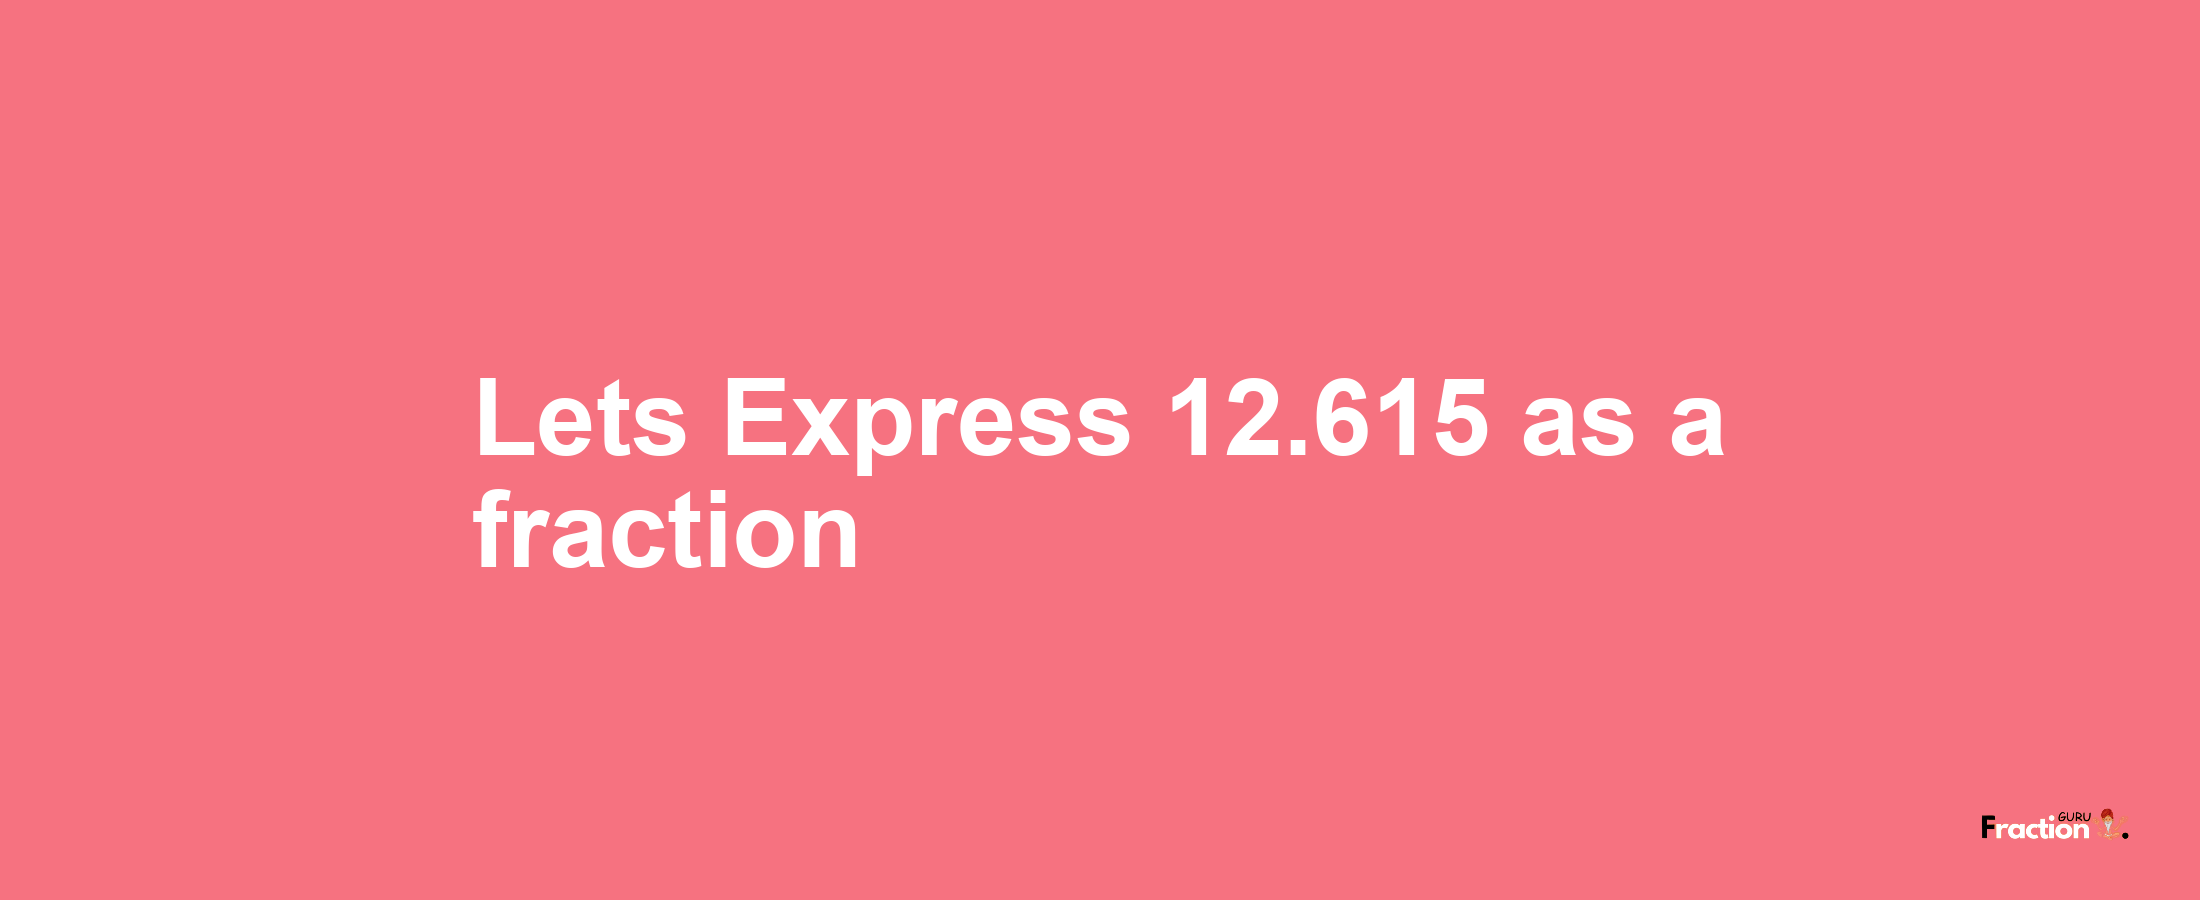 Lets Express 12.615 as afraction